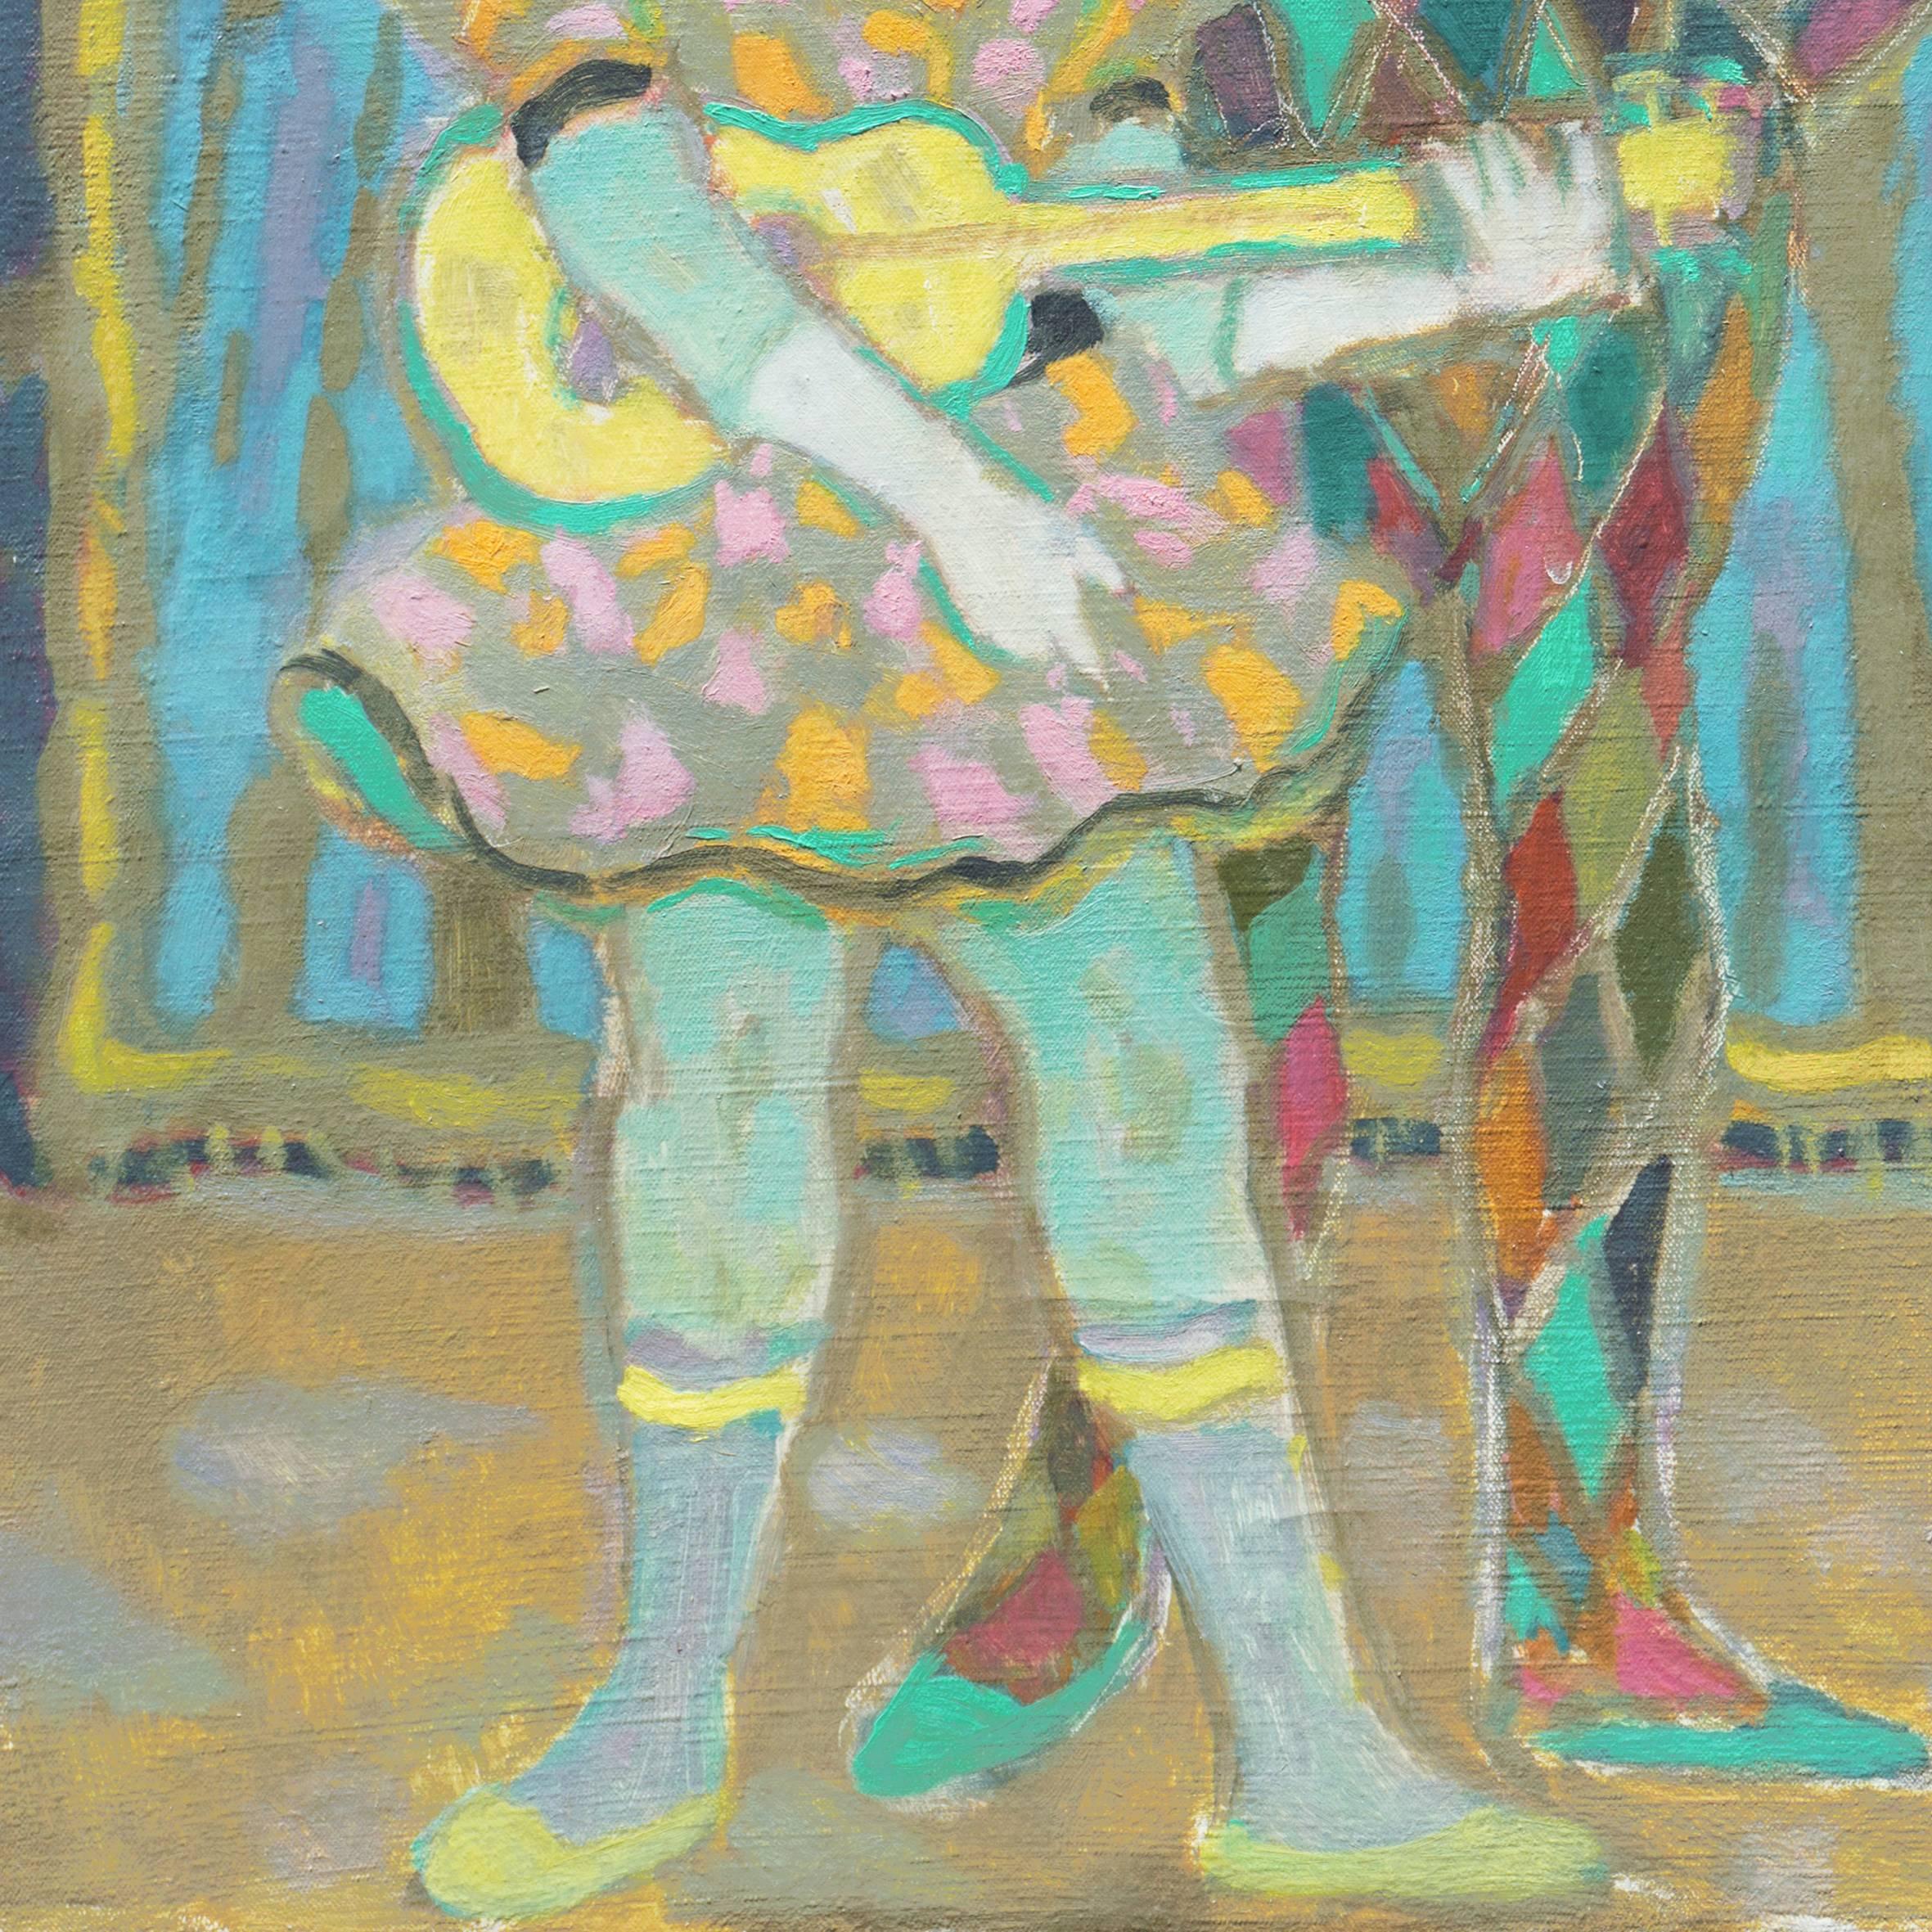 Signed lower right, 'Andre Regagnon' (French, 1902-1976) and painted circa 1950.

A substantial, Post-Impressionist figural oil showing the two characters from the Commedia dell'Arte standing, with Columbina playing a guitar and Arlequino,